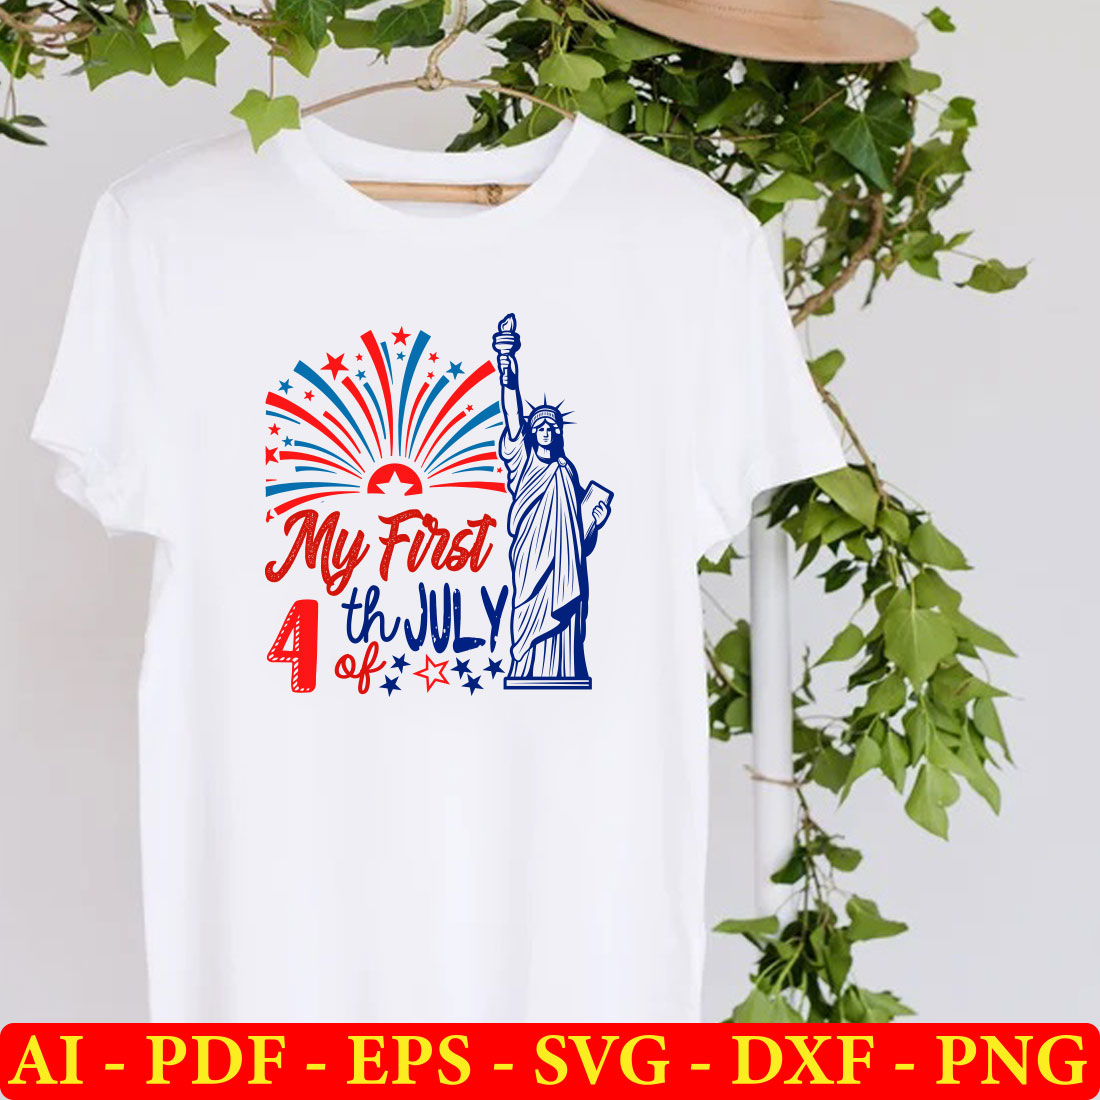 T - shirt with the statue of liberty on it.